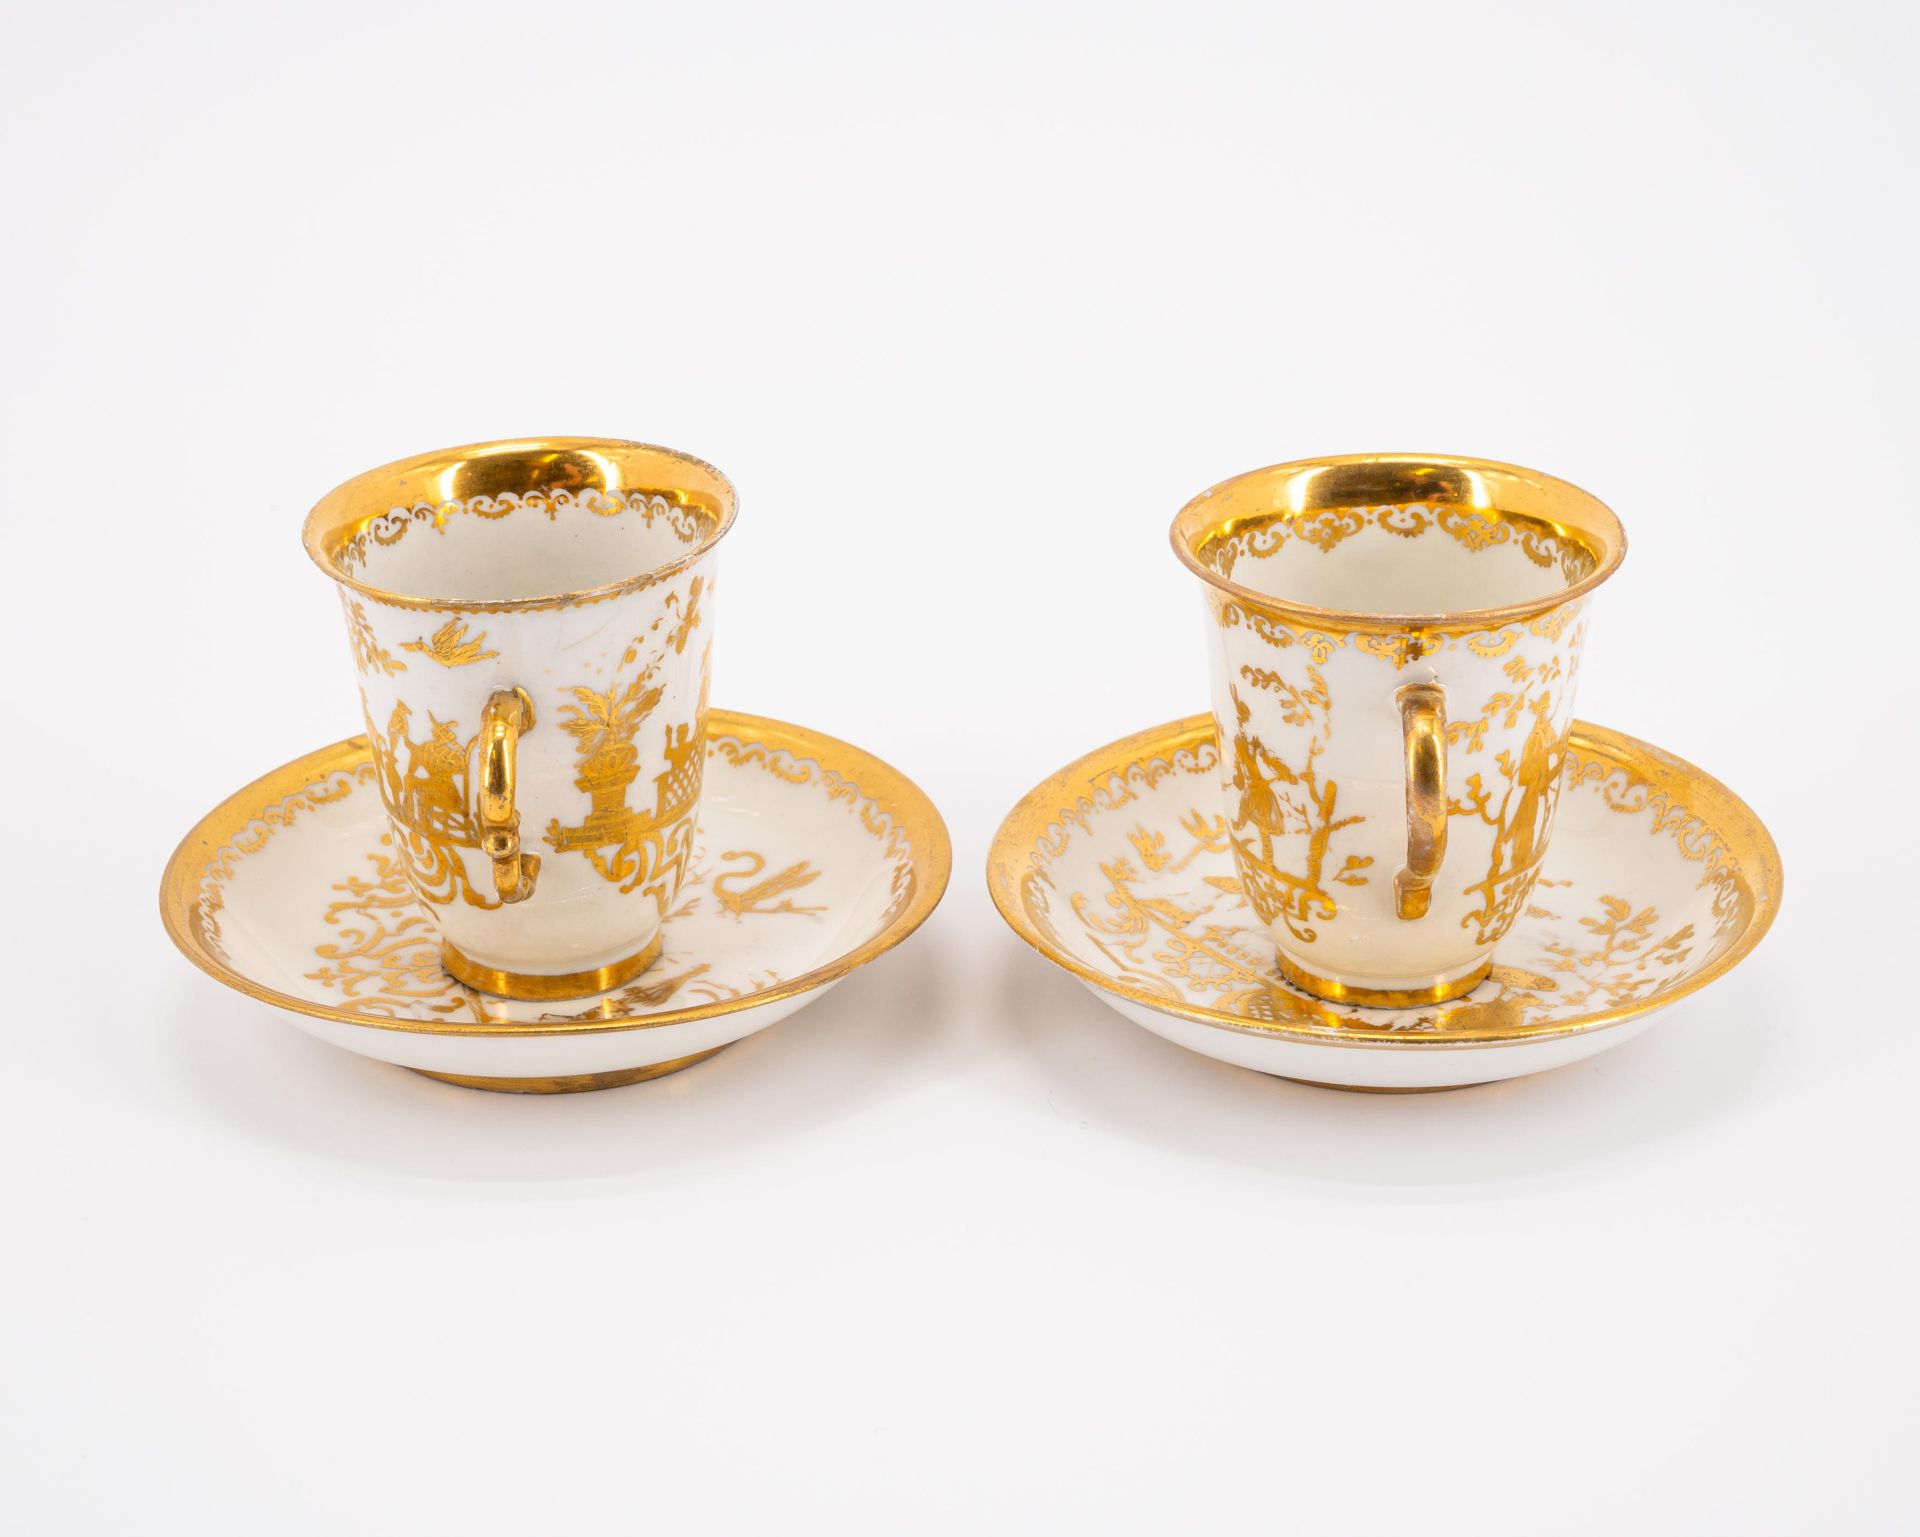 Meissen: TWO PORCELAIN BEAKERS WITH DOUBLE HANDLE AND SAUCERS WITH GOLDEN CHINOISERIES - Image 2 of 6